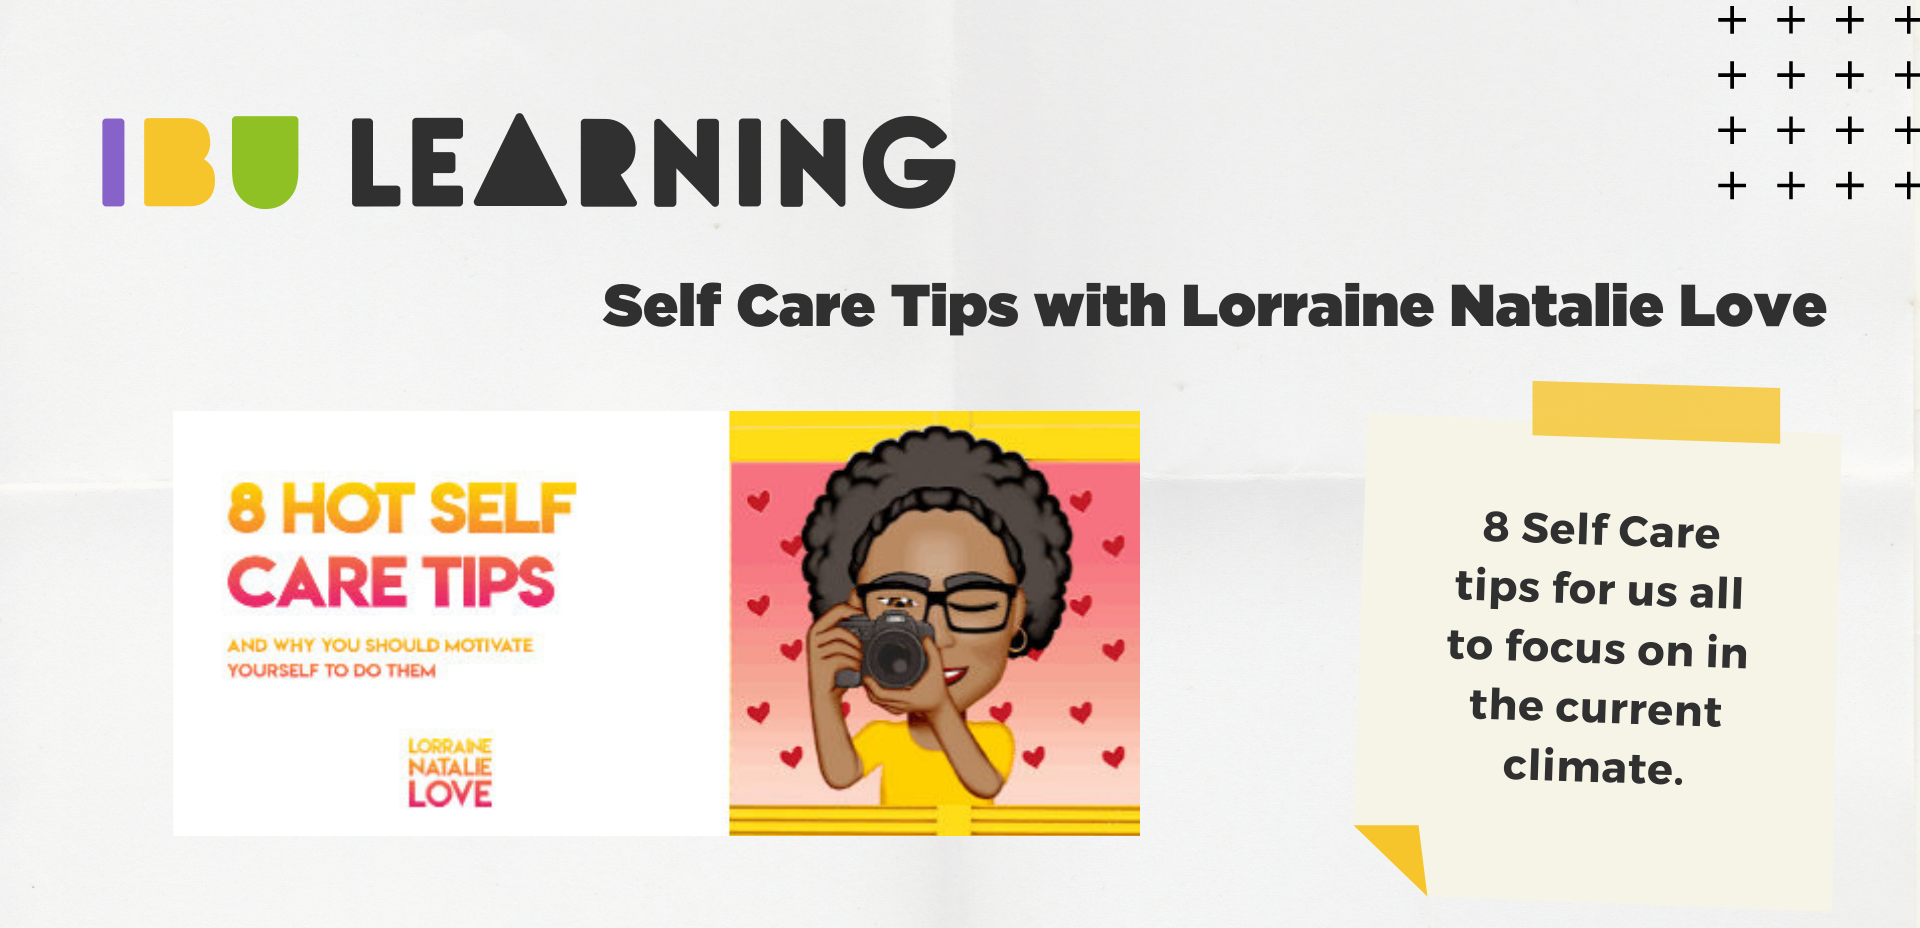 8 Hot Self Care Tips with Lorraine Natalie Love